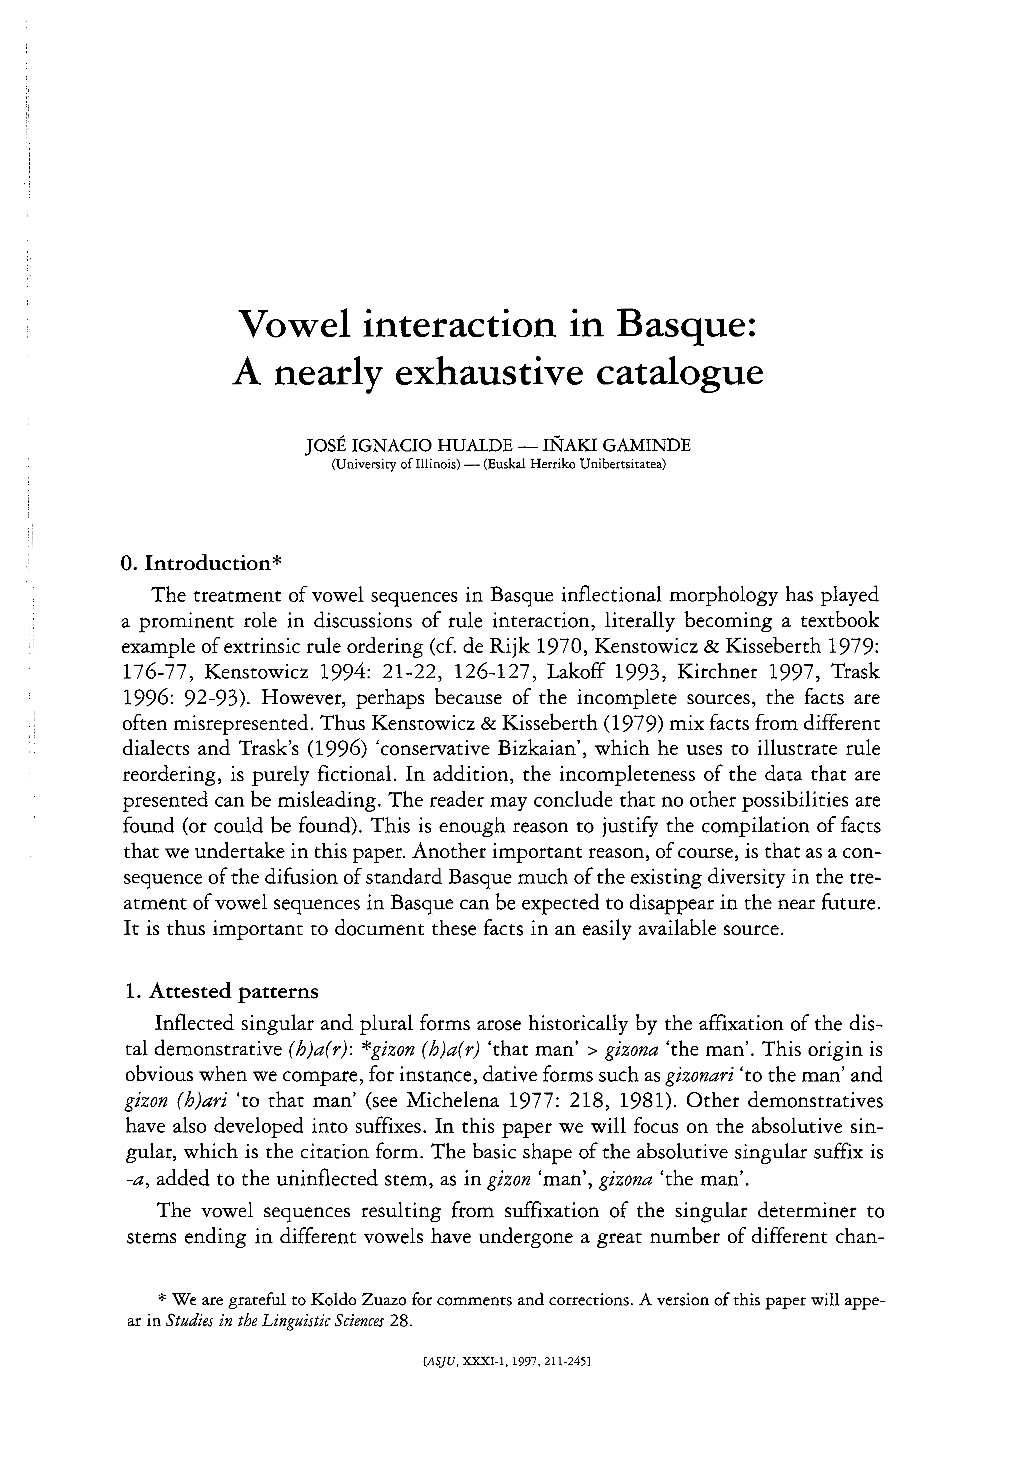 Vowel Interaction in Basque: a Nearly Exhaustive Catalogue